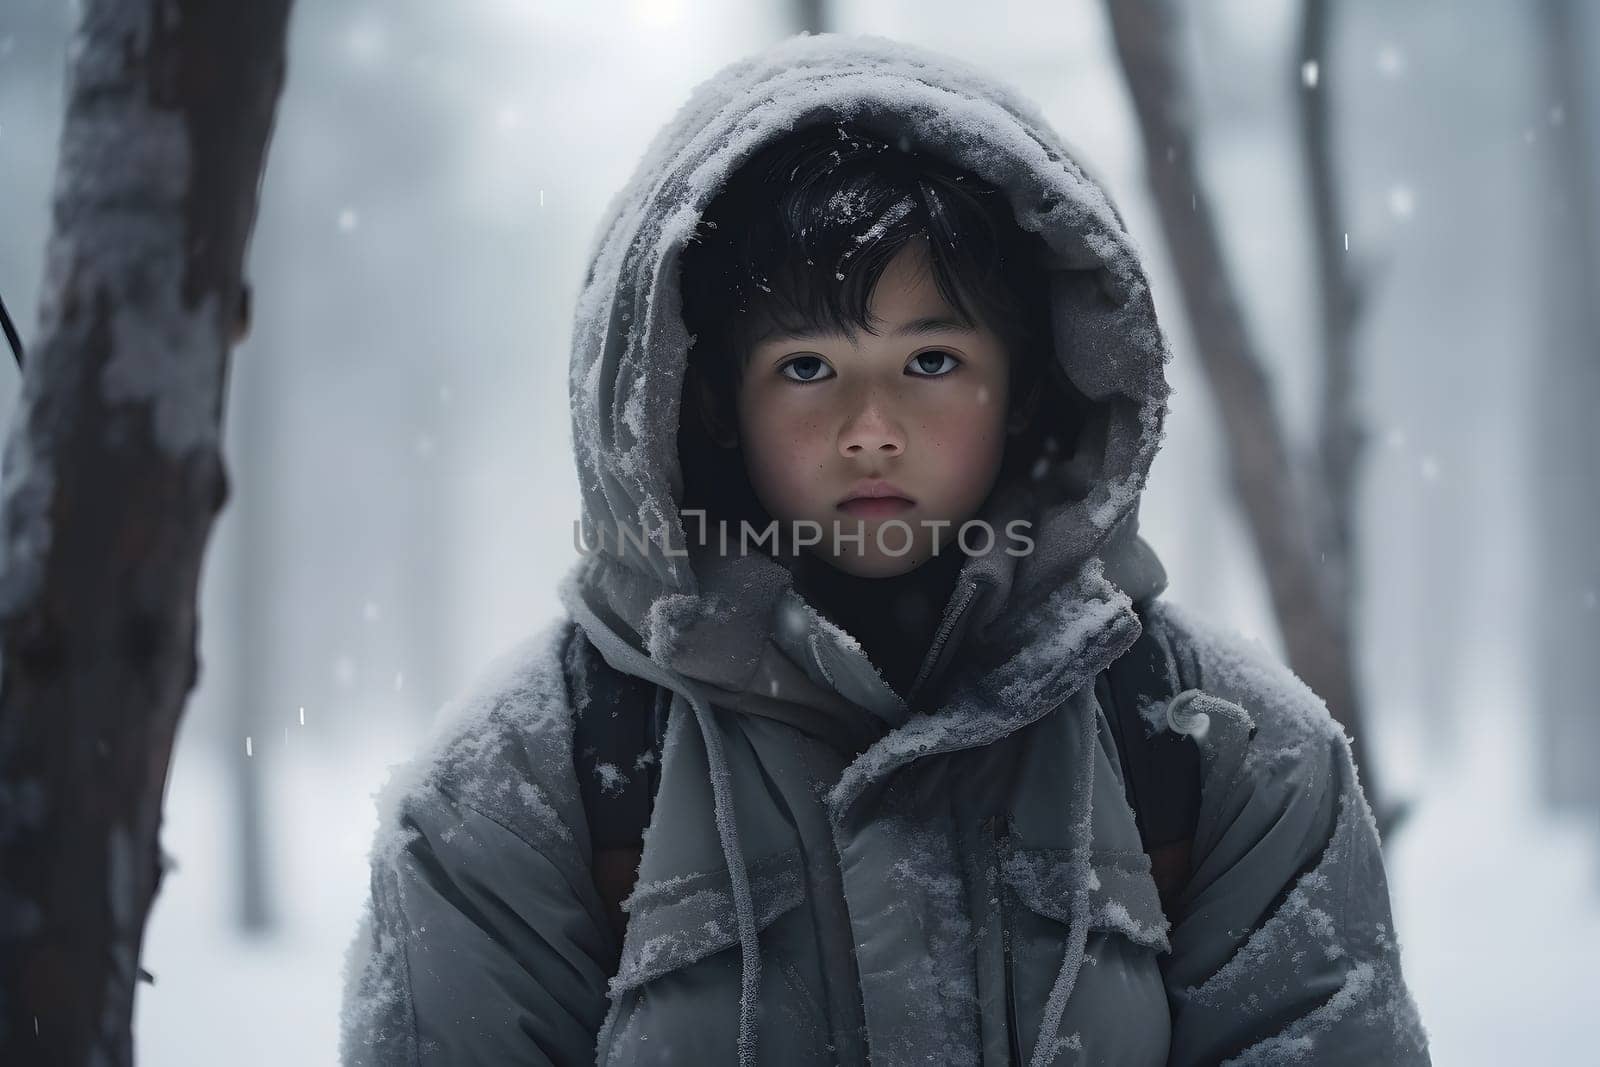 Asian boy lost in forest at snowy winter day. Neural network generated image. Not based on any actual person or scene.